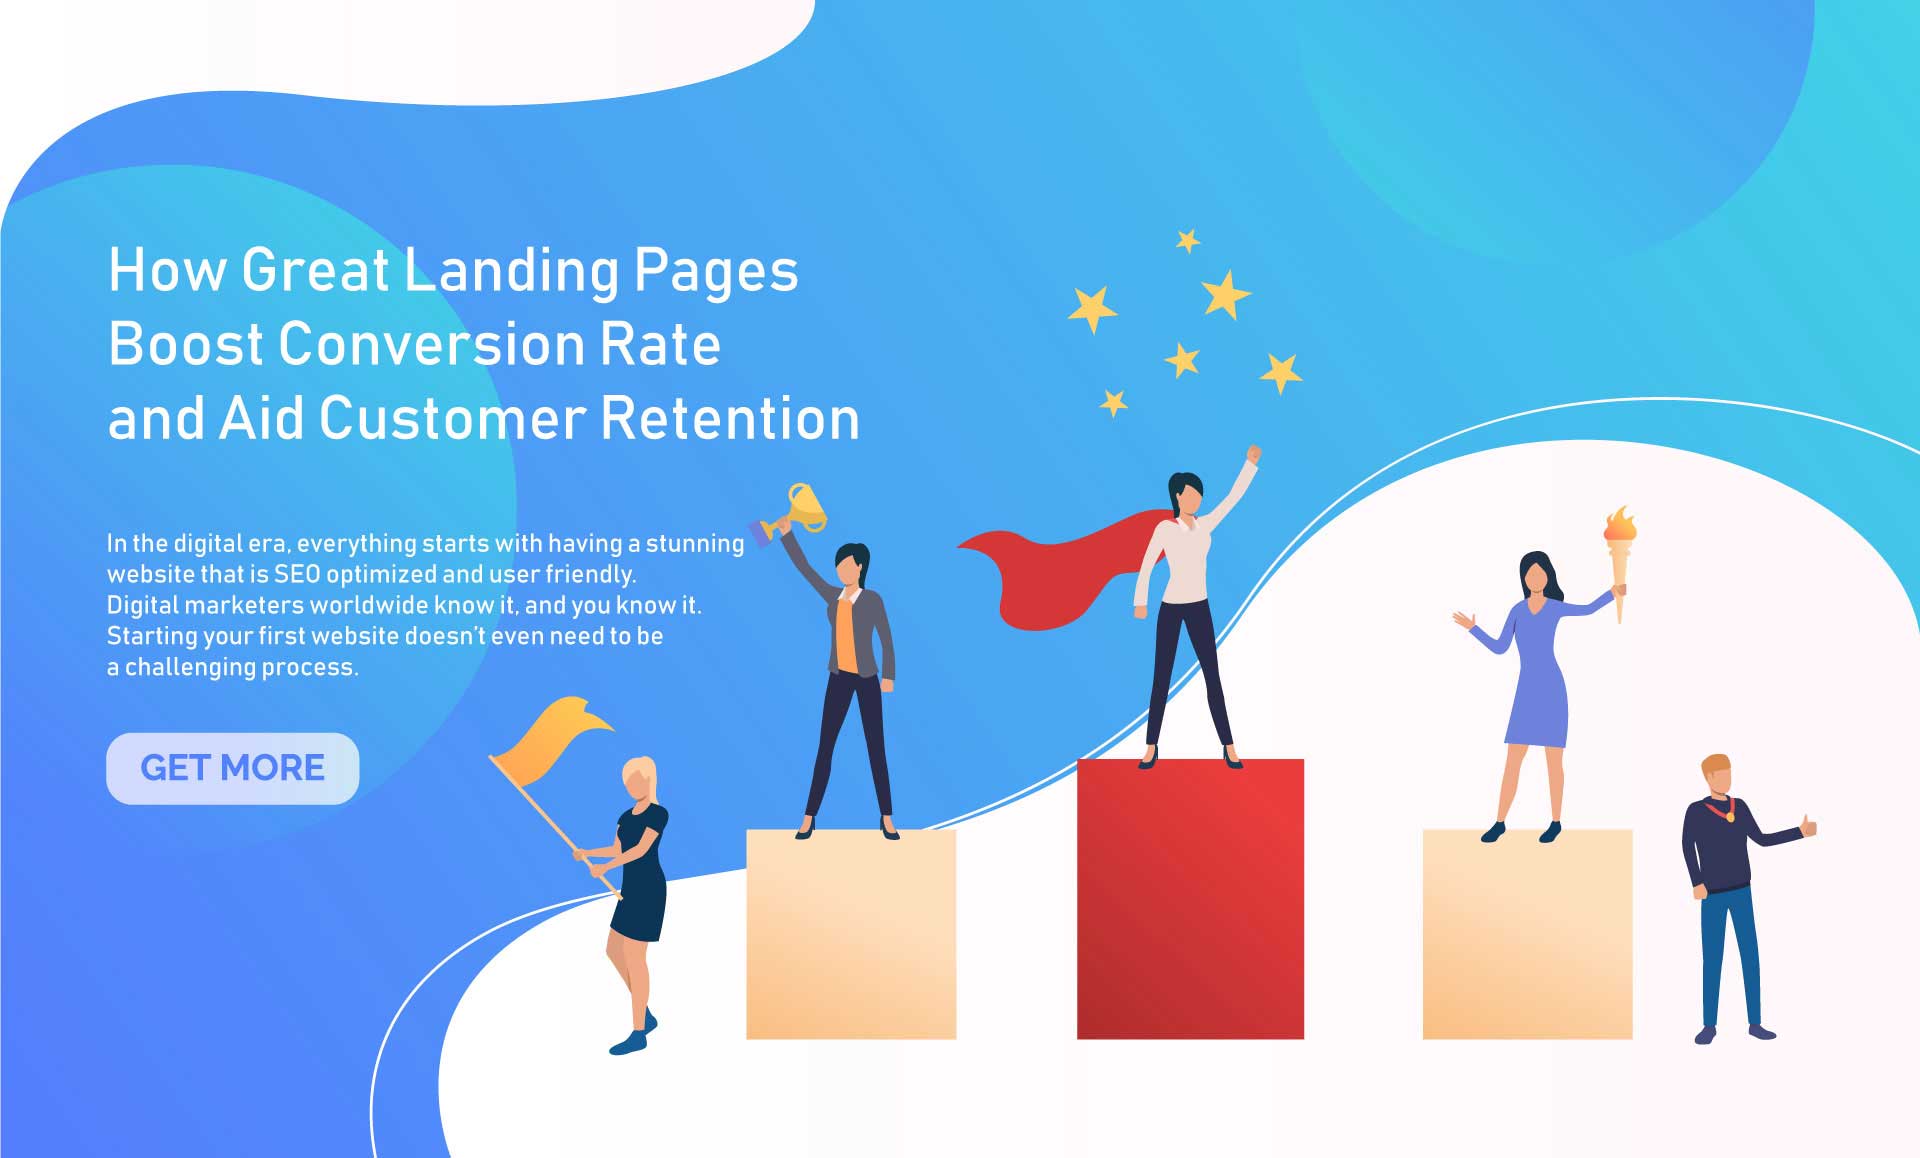 How Great Landing Pages Boost Conversion Rate and Aid Customer Retention